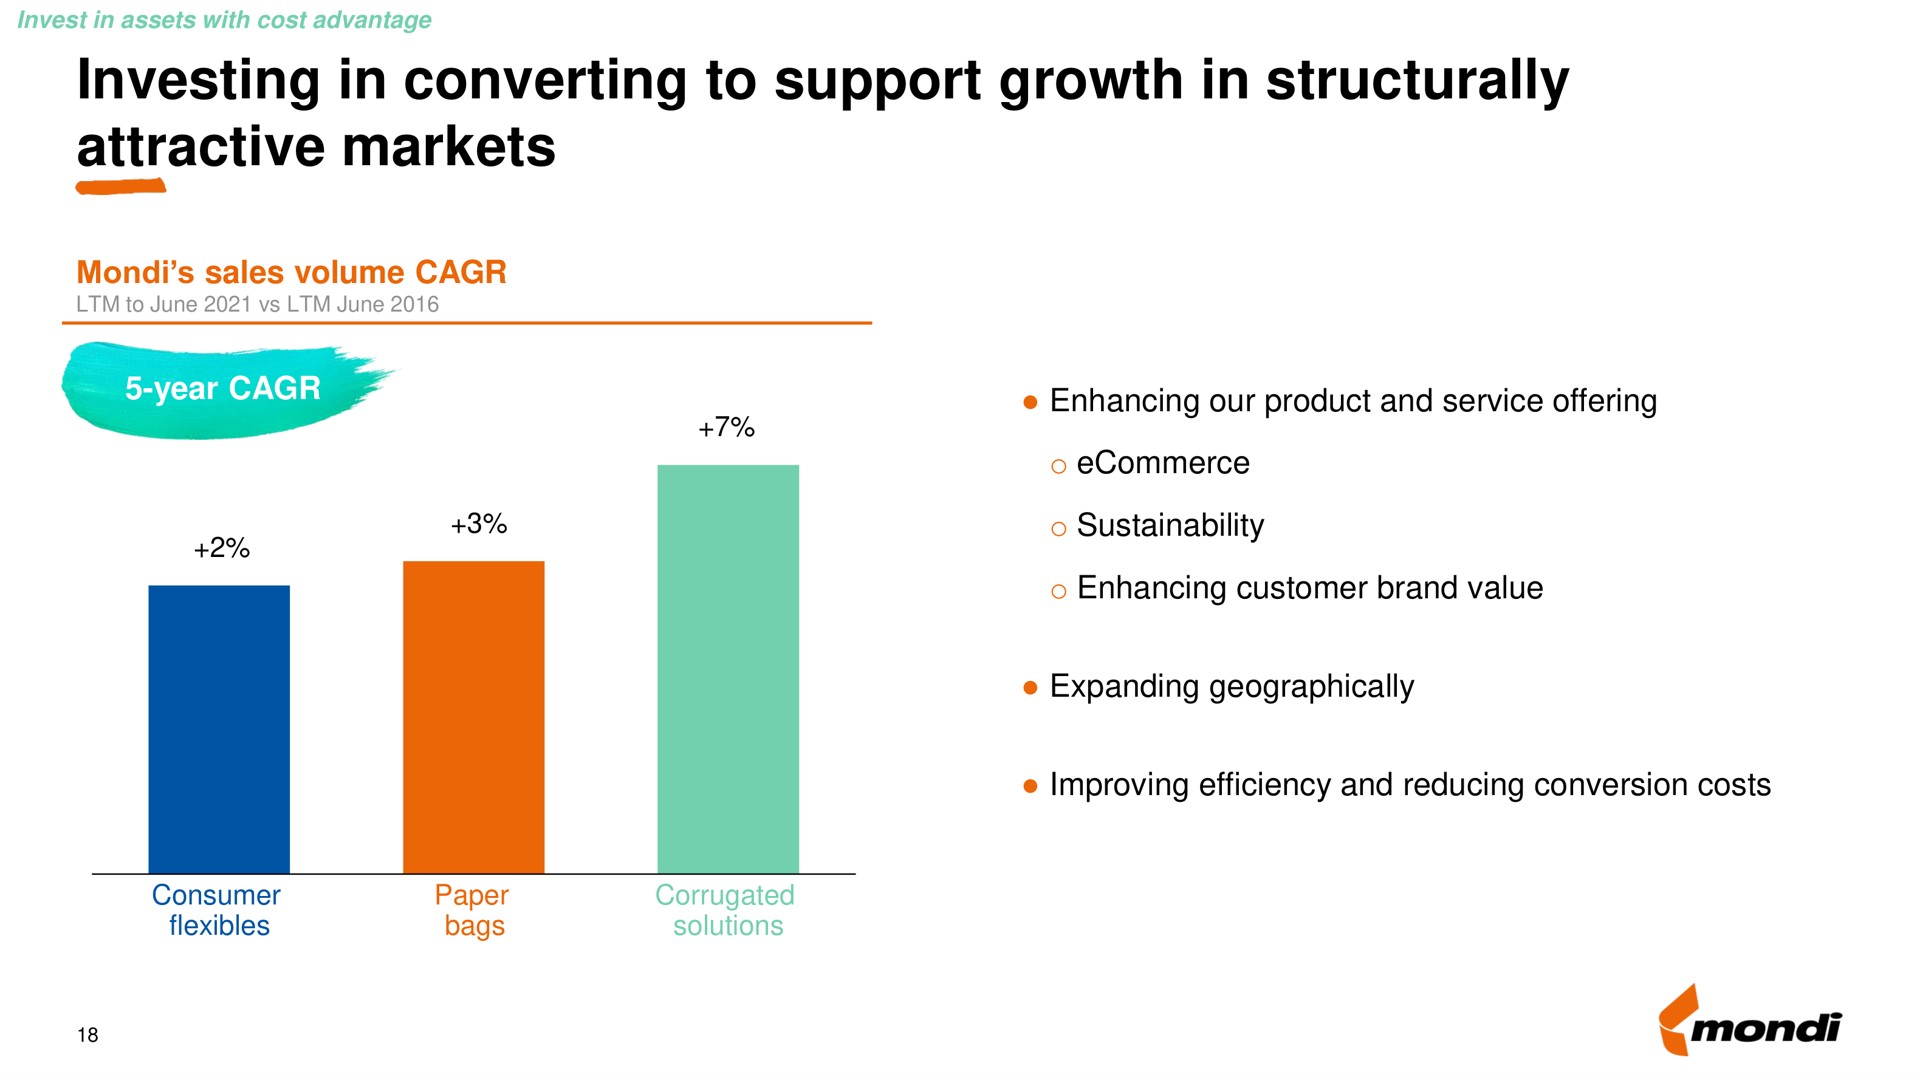 investing in converting to support growth in structurally attractive markets | Mondi